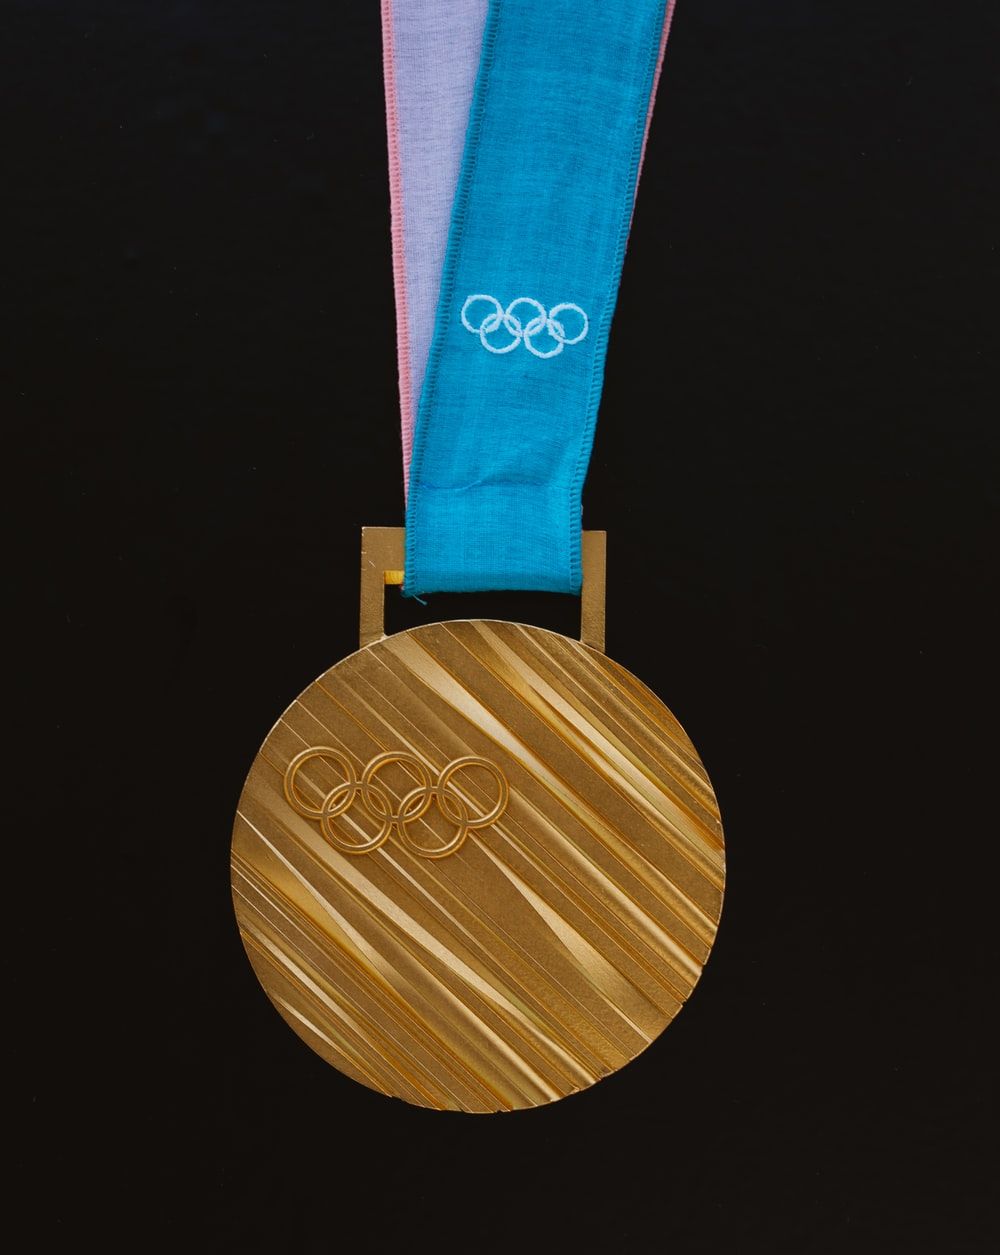 Olympics Picture. Download Free Image